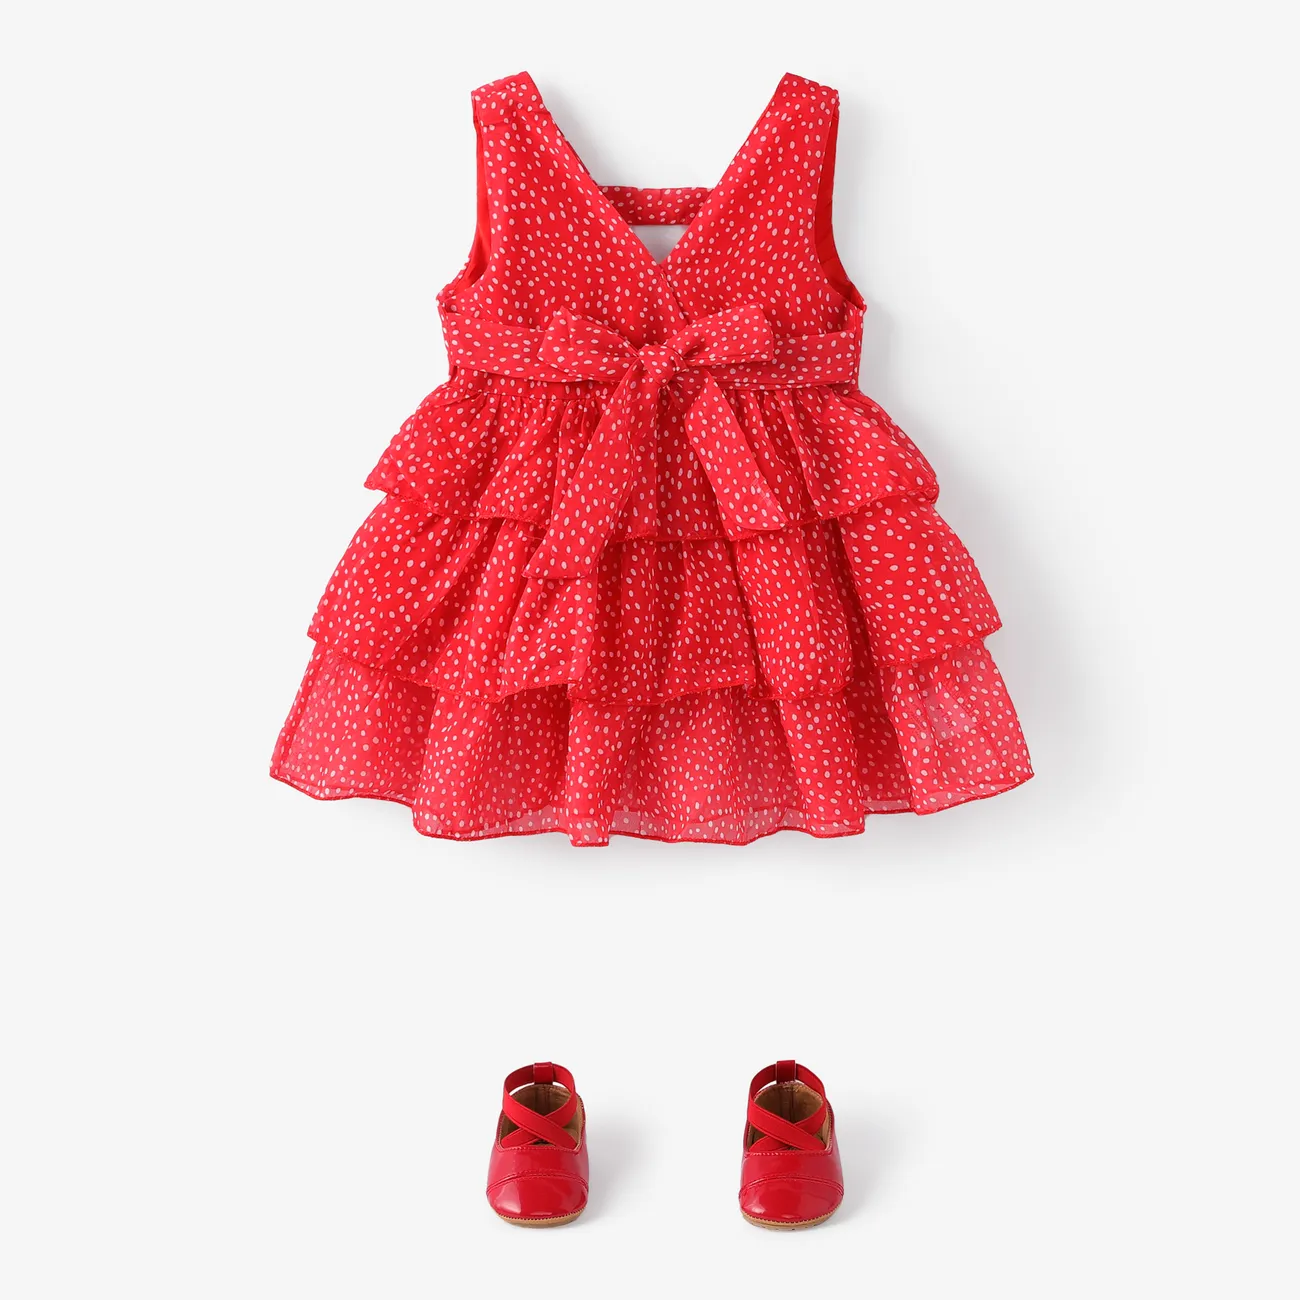 Dots or Floral Print Flounce Layered Sleeveless Baby Dress Red big image 1